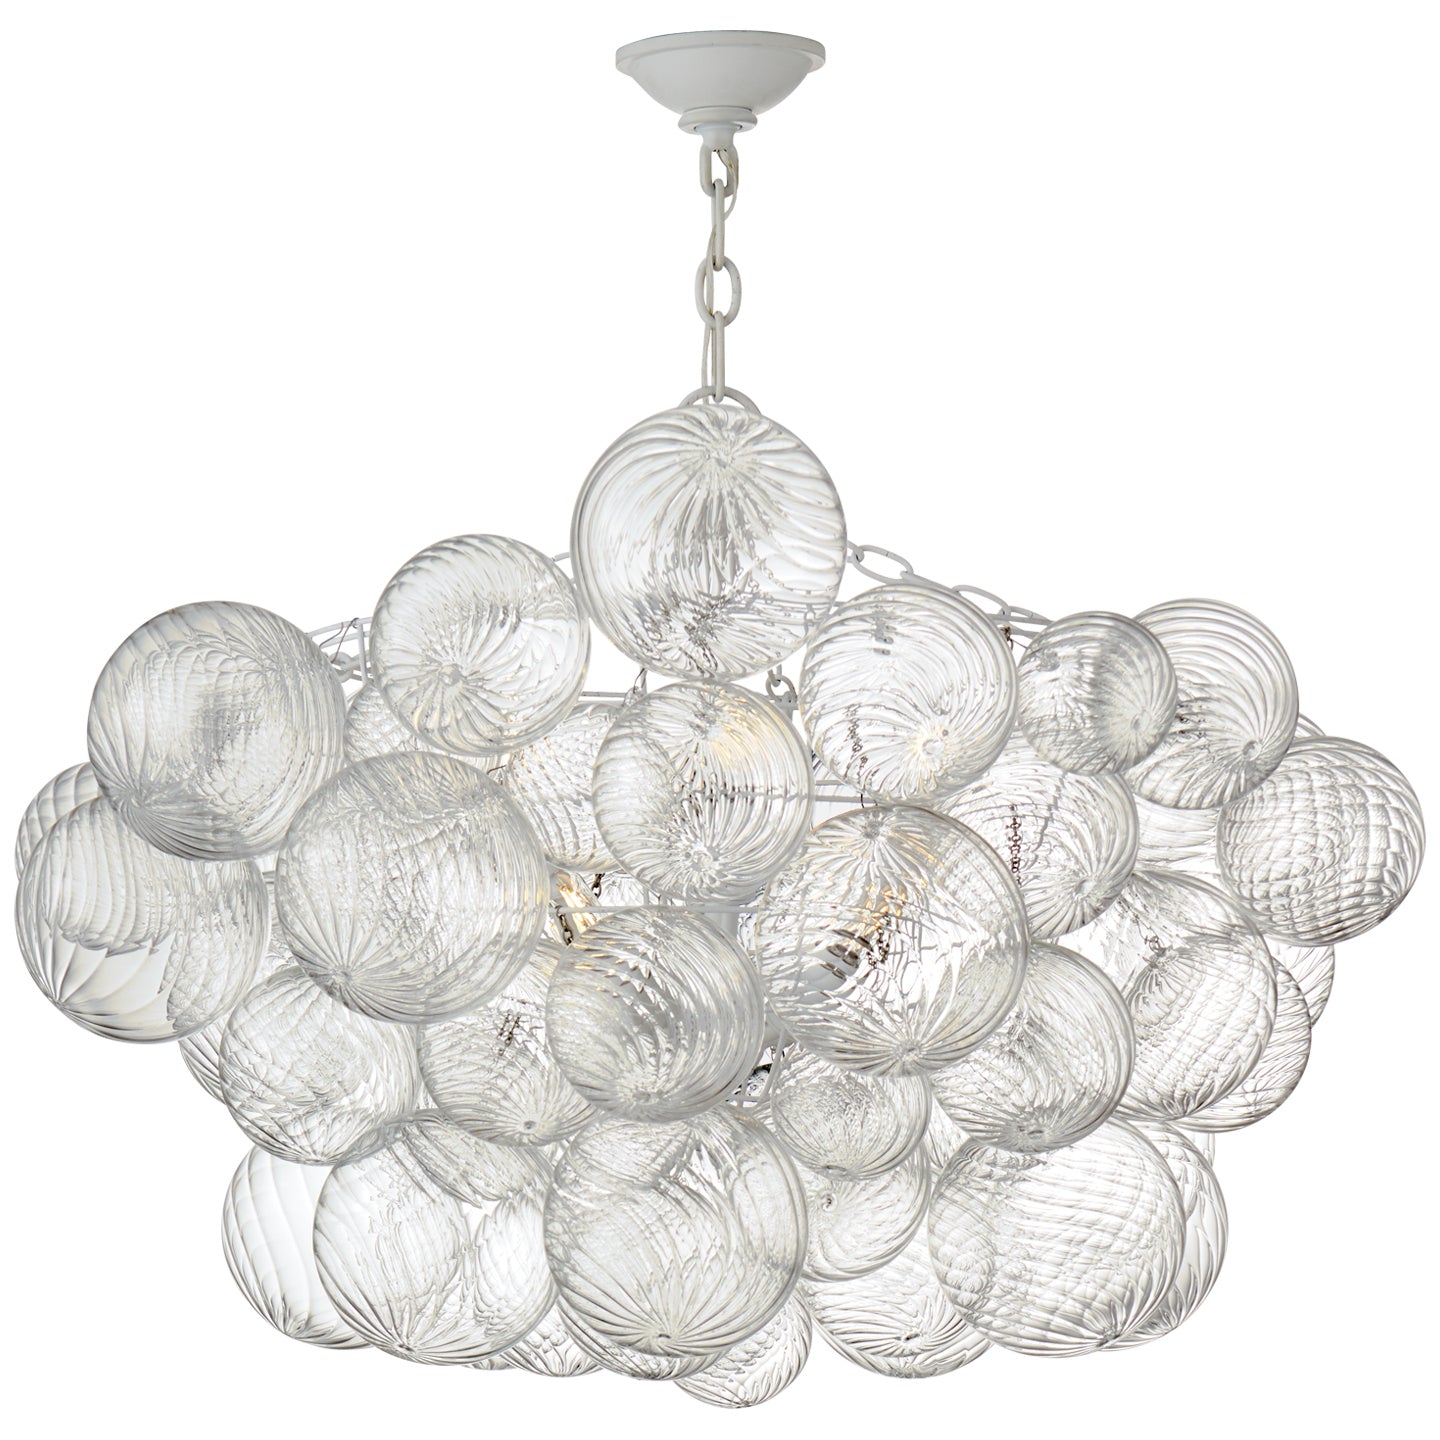 Visual Comfort Signature - JN 5112PW/CG - Eight Light Chandelier - Talia - Plaster White and Clear Swirled Glass